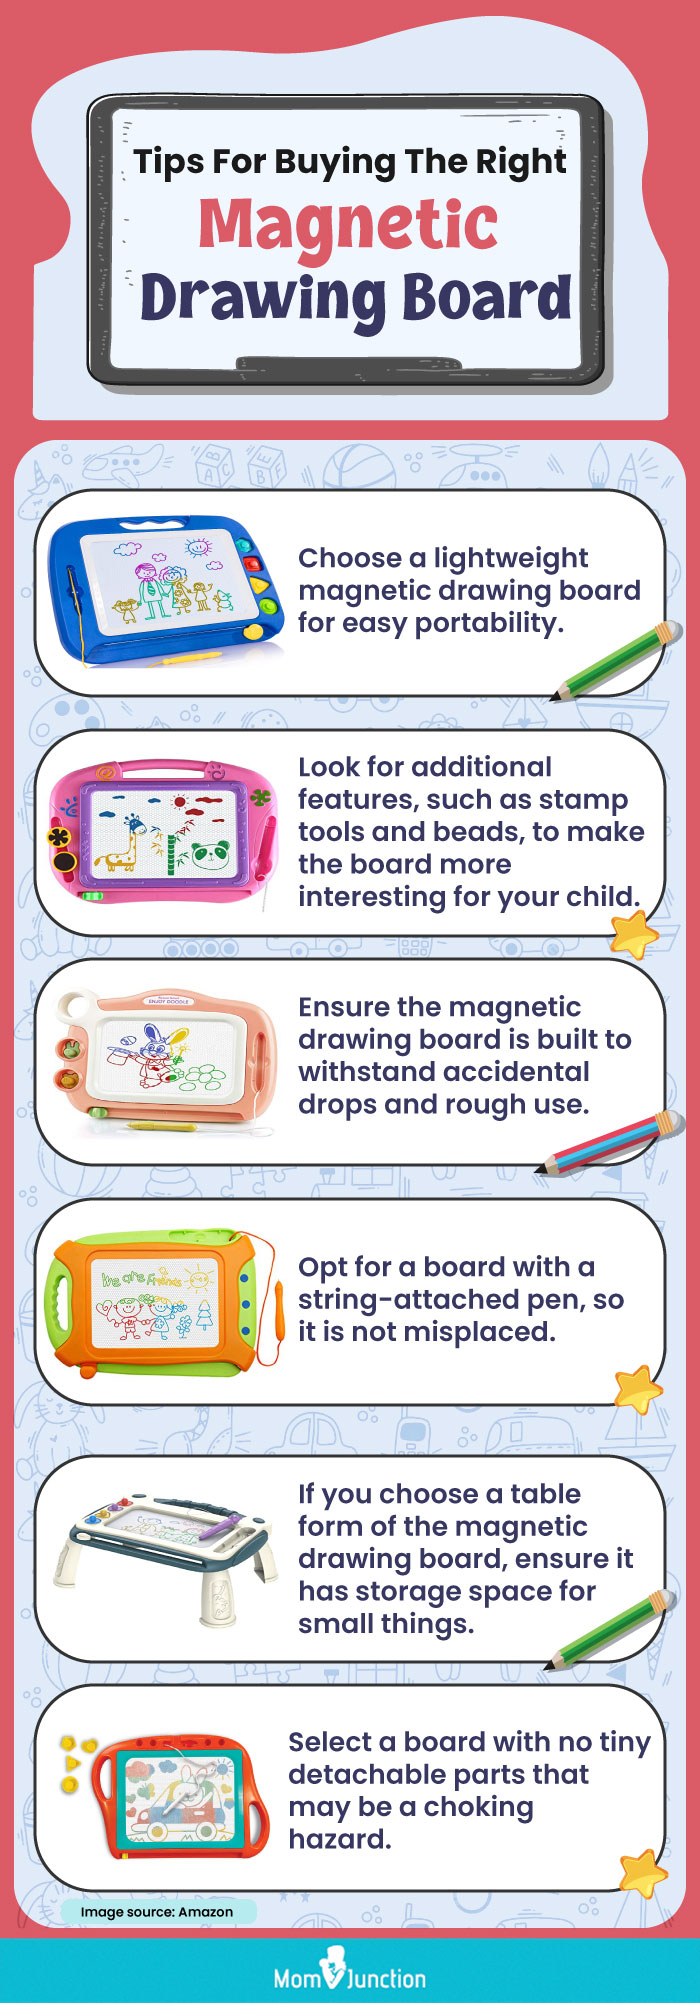 https://www.momjunction.com/wp-content/uploads/2021/11/Infographic-Features-To-Consider-When-Buying-Magnetic-Drawing-Boards.jpg